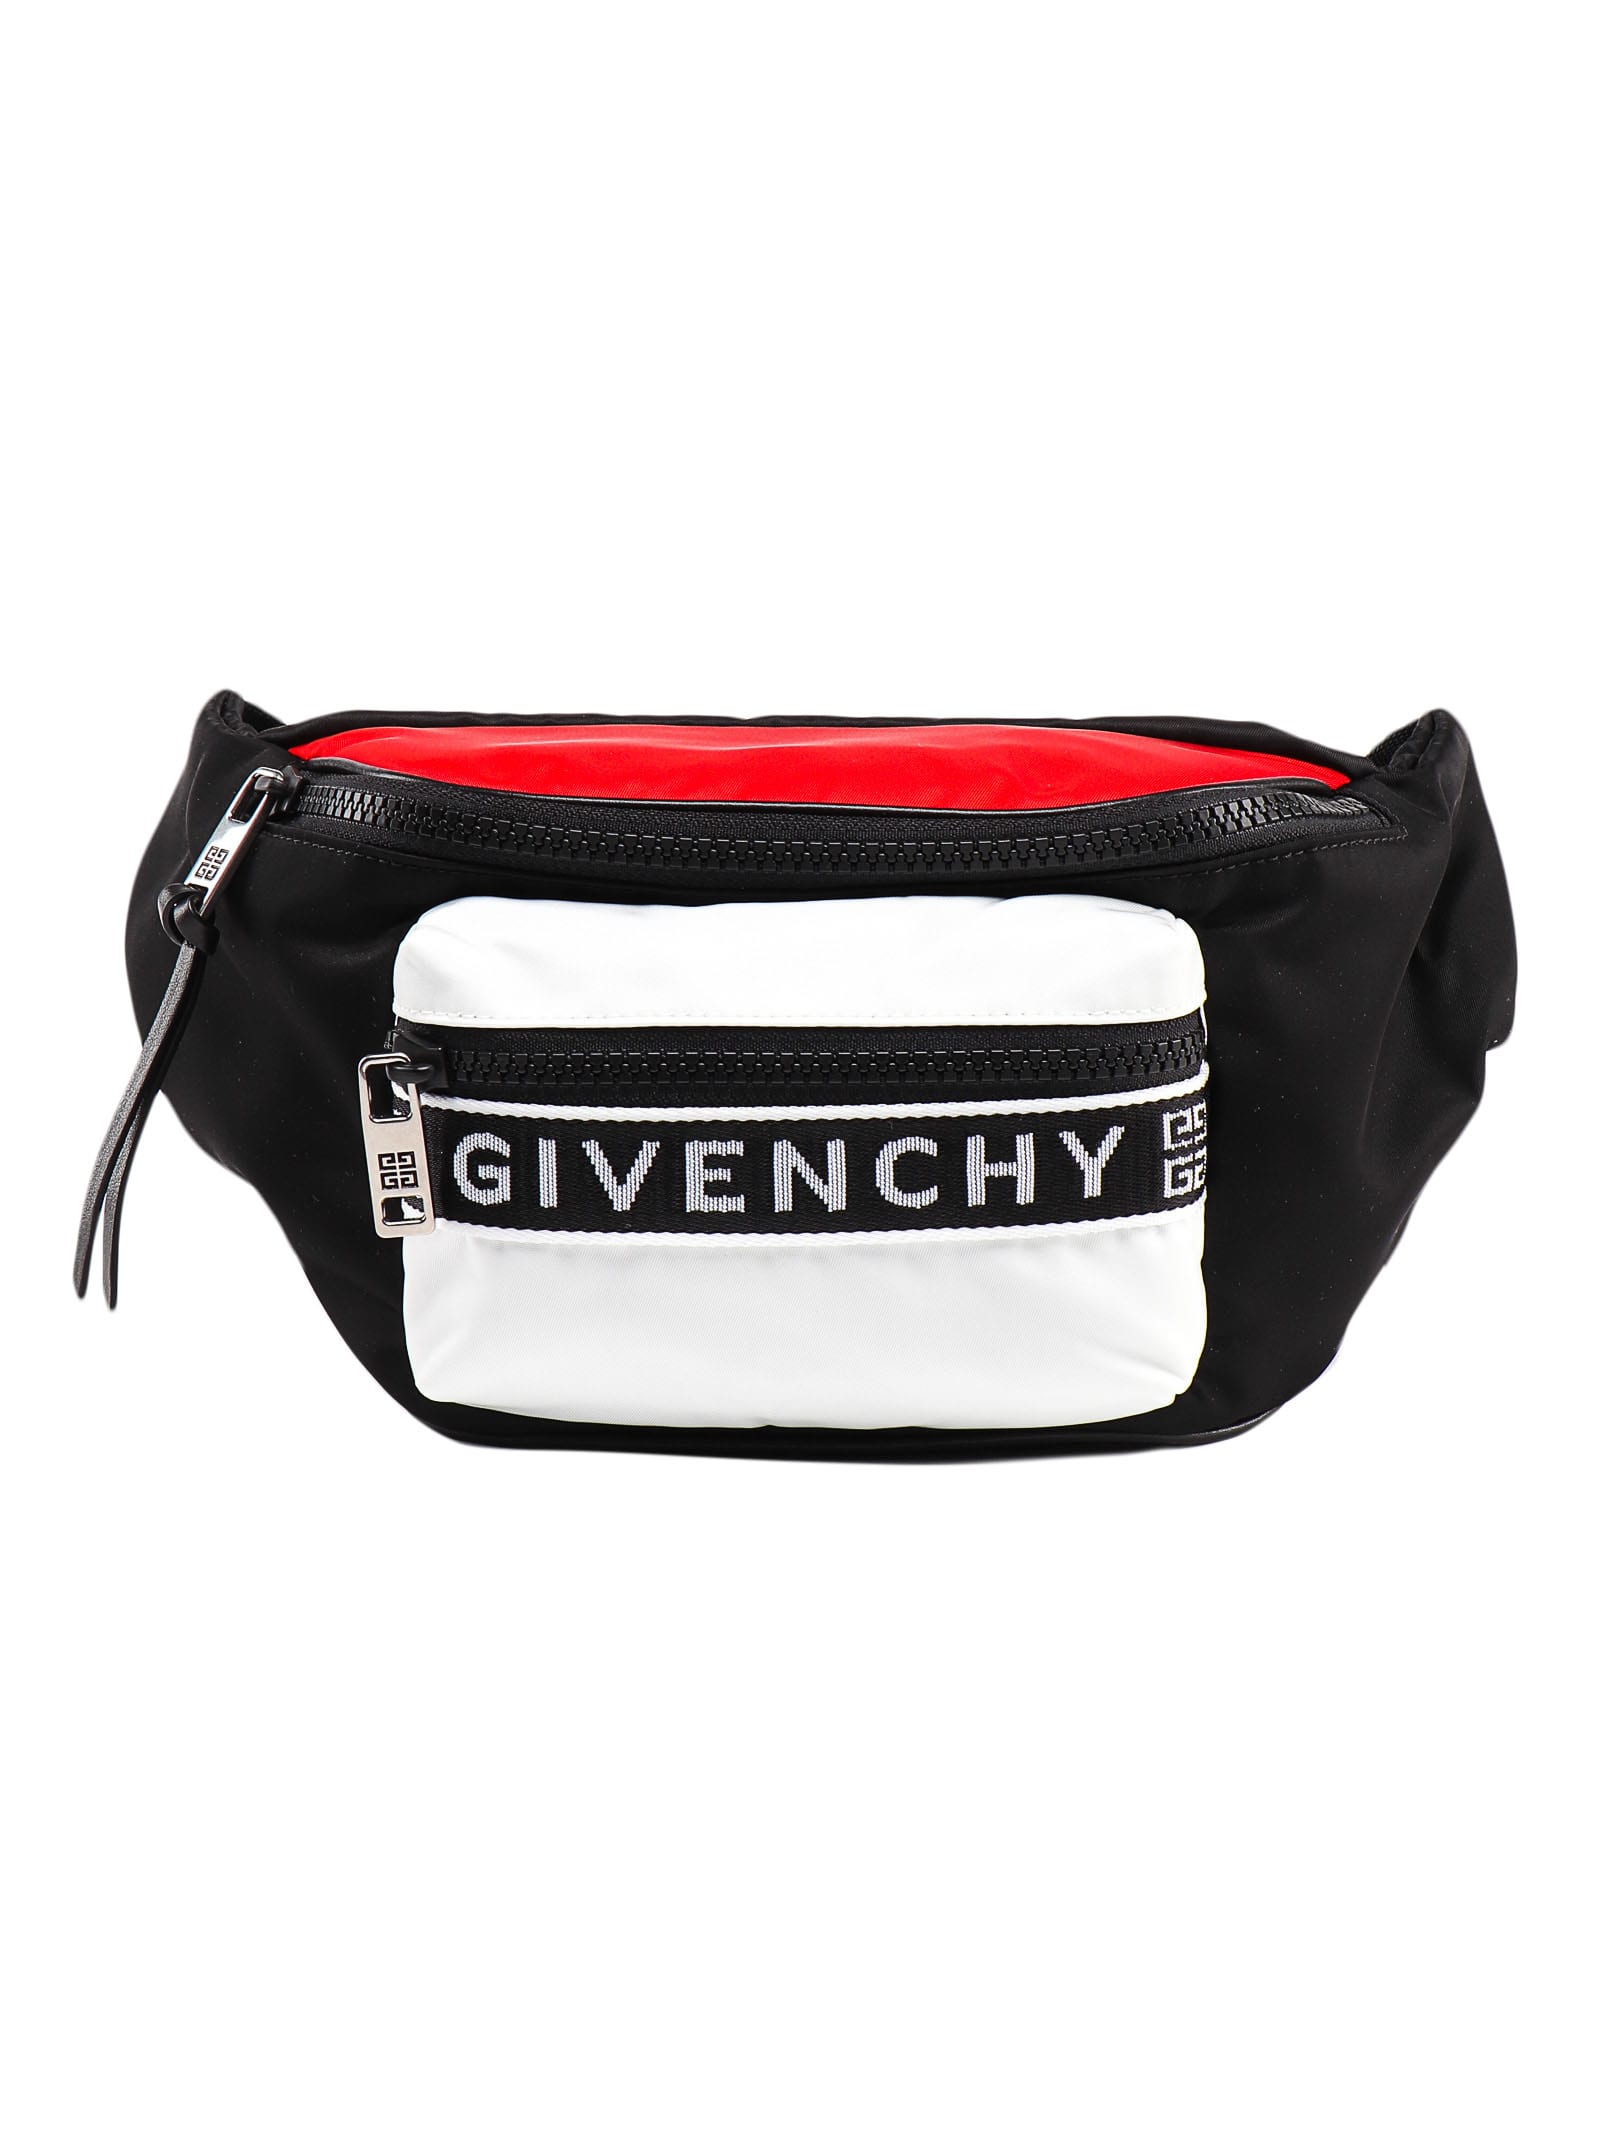 Givenchy Givenchy Light 3 Bum Bag - Black/red/white - 10991907 | italist